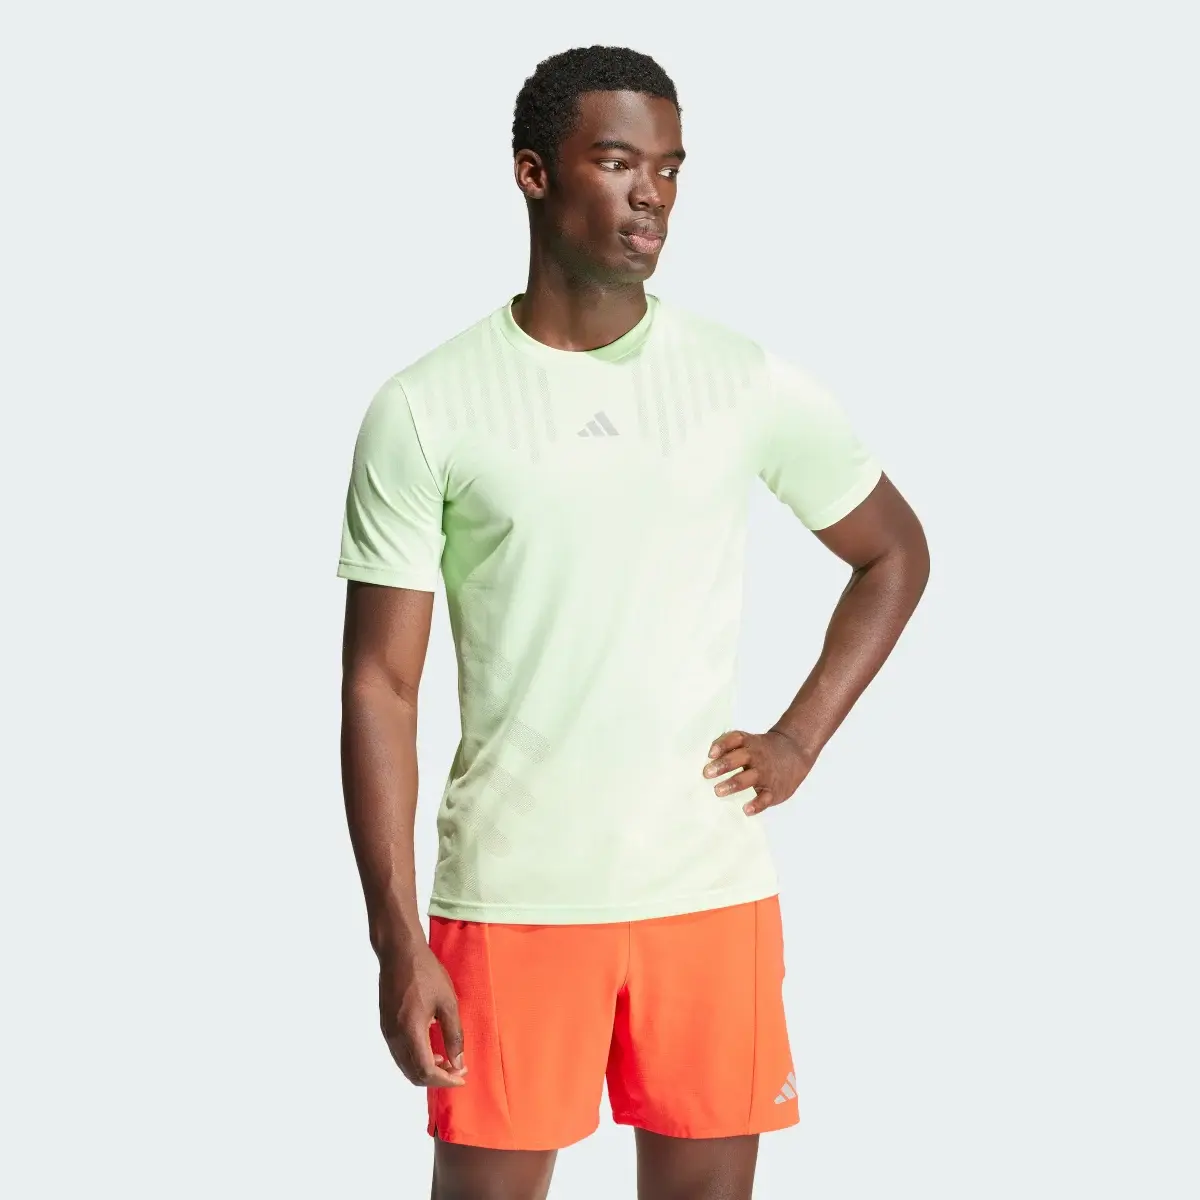 Adidas HIIT Airchill Workout Tee. 2